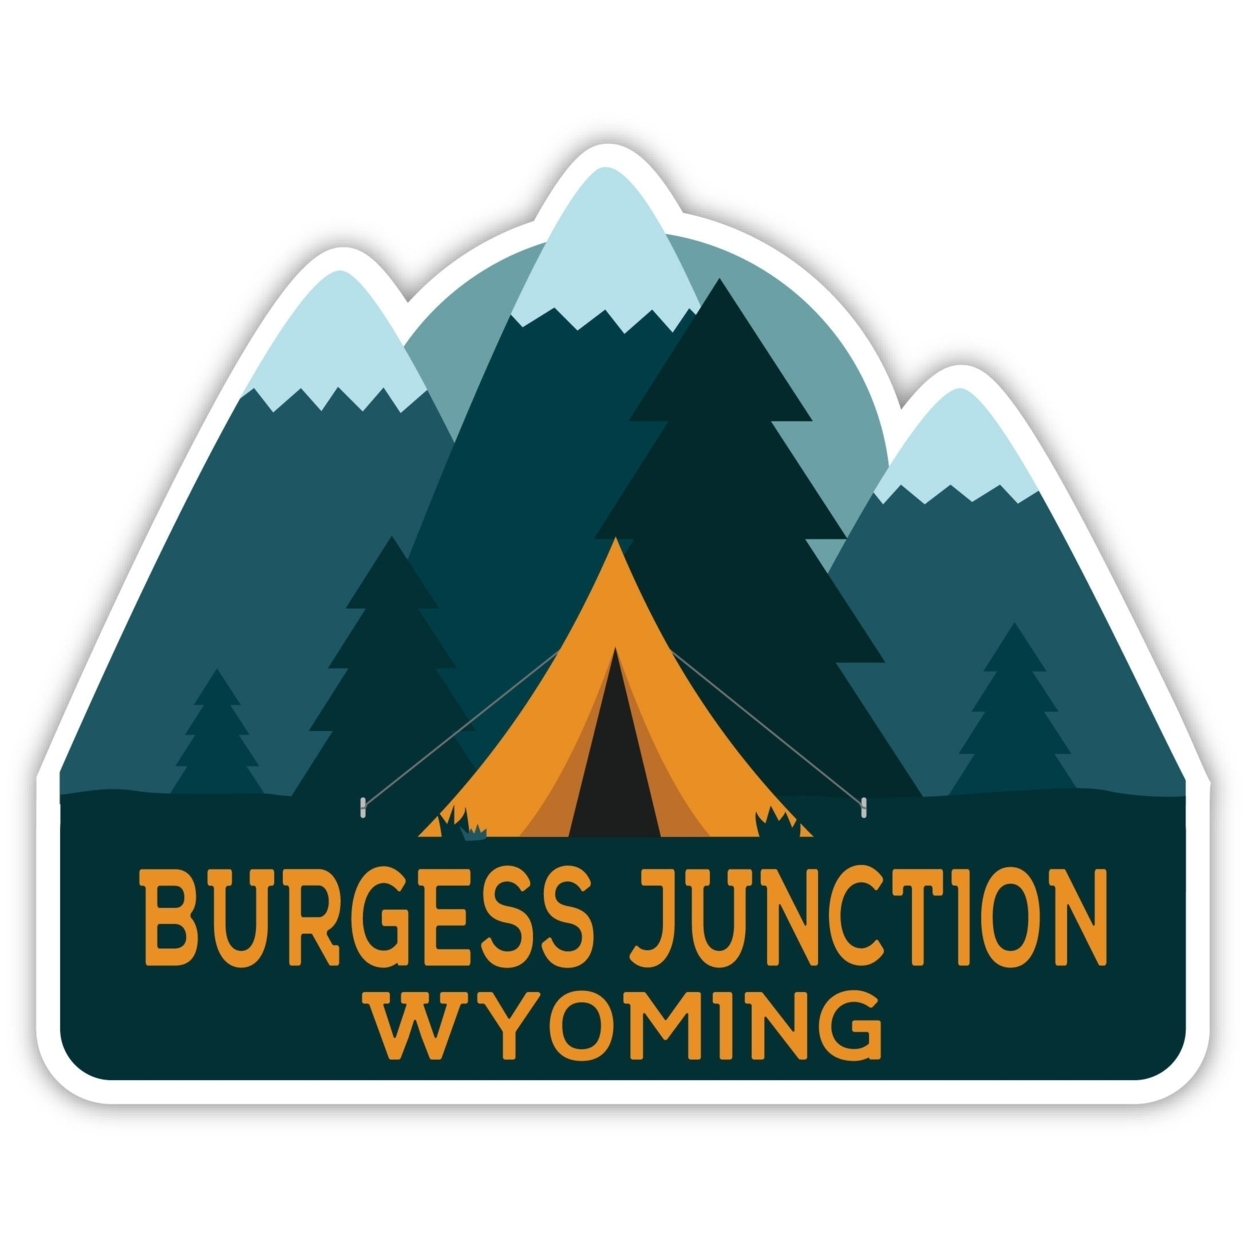 Burgess Junction Wyoming Souvenir Decorative Stickers (Choose Theme And Size) - 4-Pack, 6-Inch, Bear